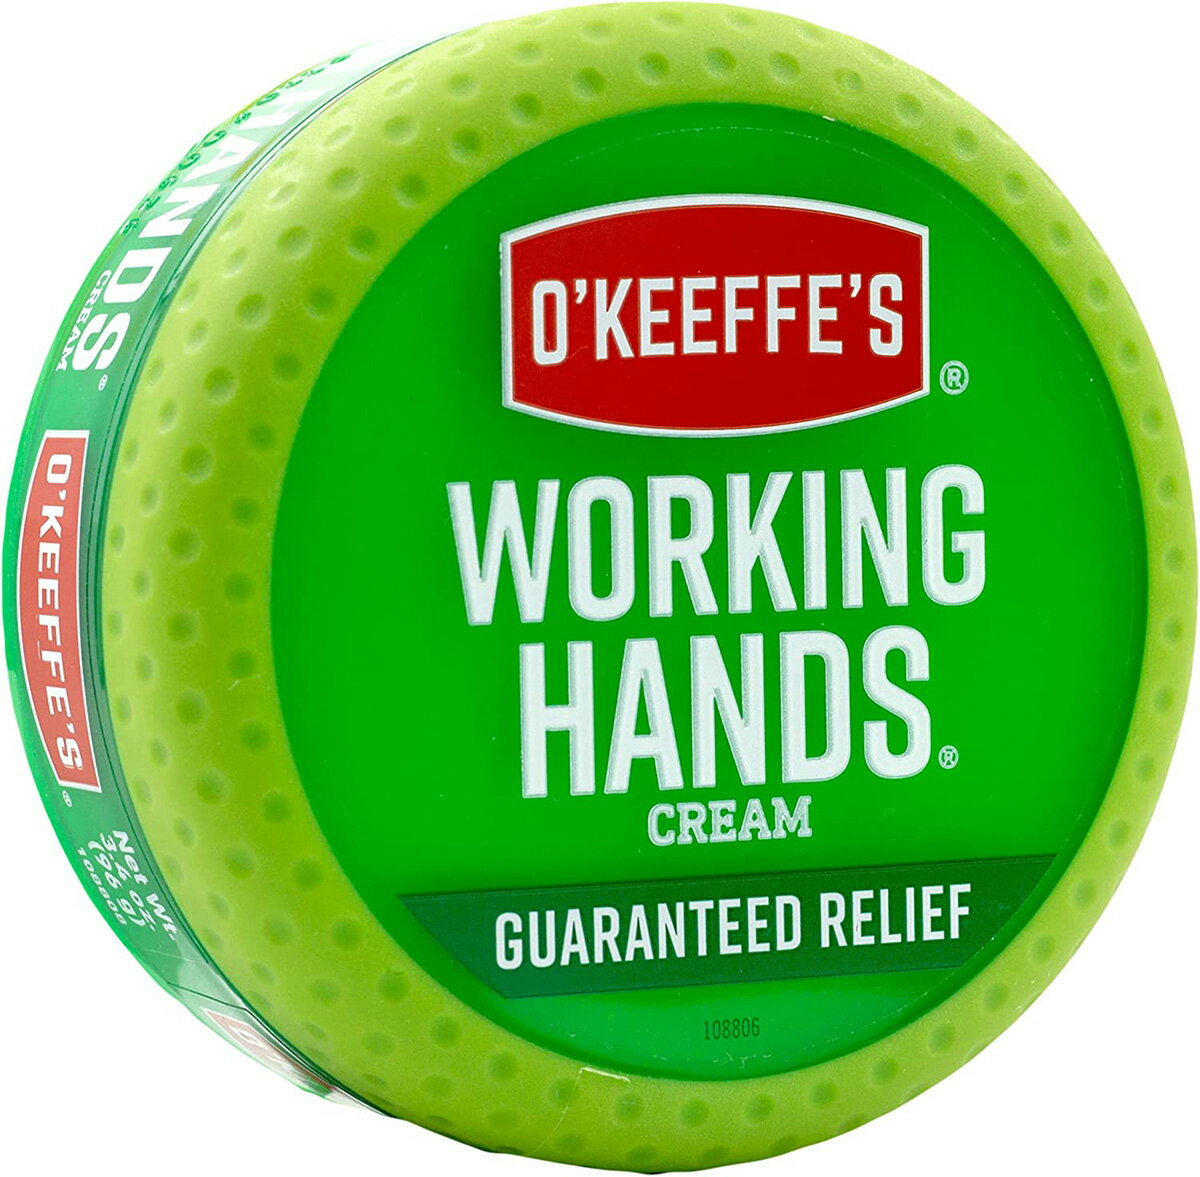 O'Keeffe's Working Hands Hand Cream for Extremely Dry , Cracked Hands, 3.4 Ounce Jar オキーフス　ワーキングハンドクリーム 